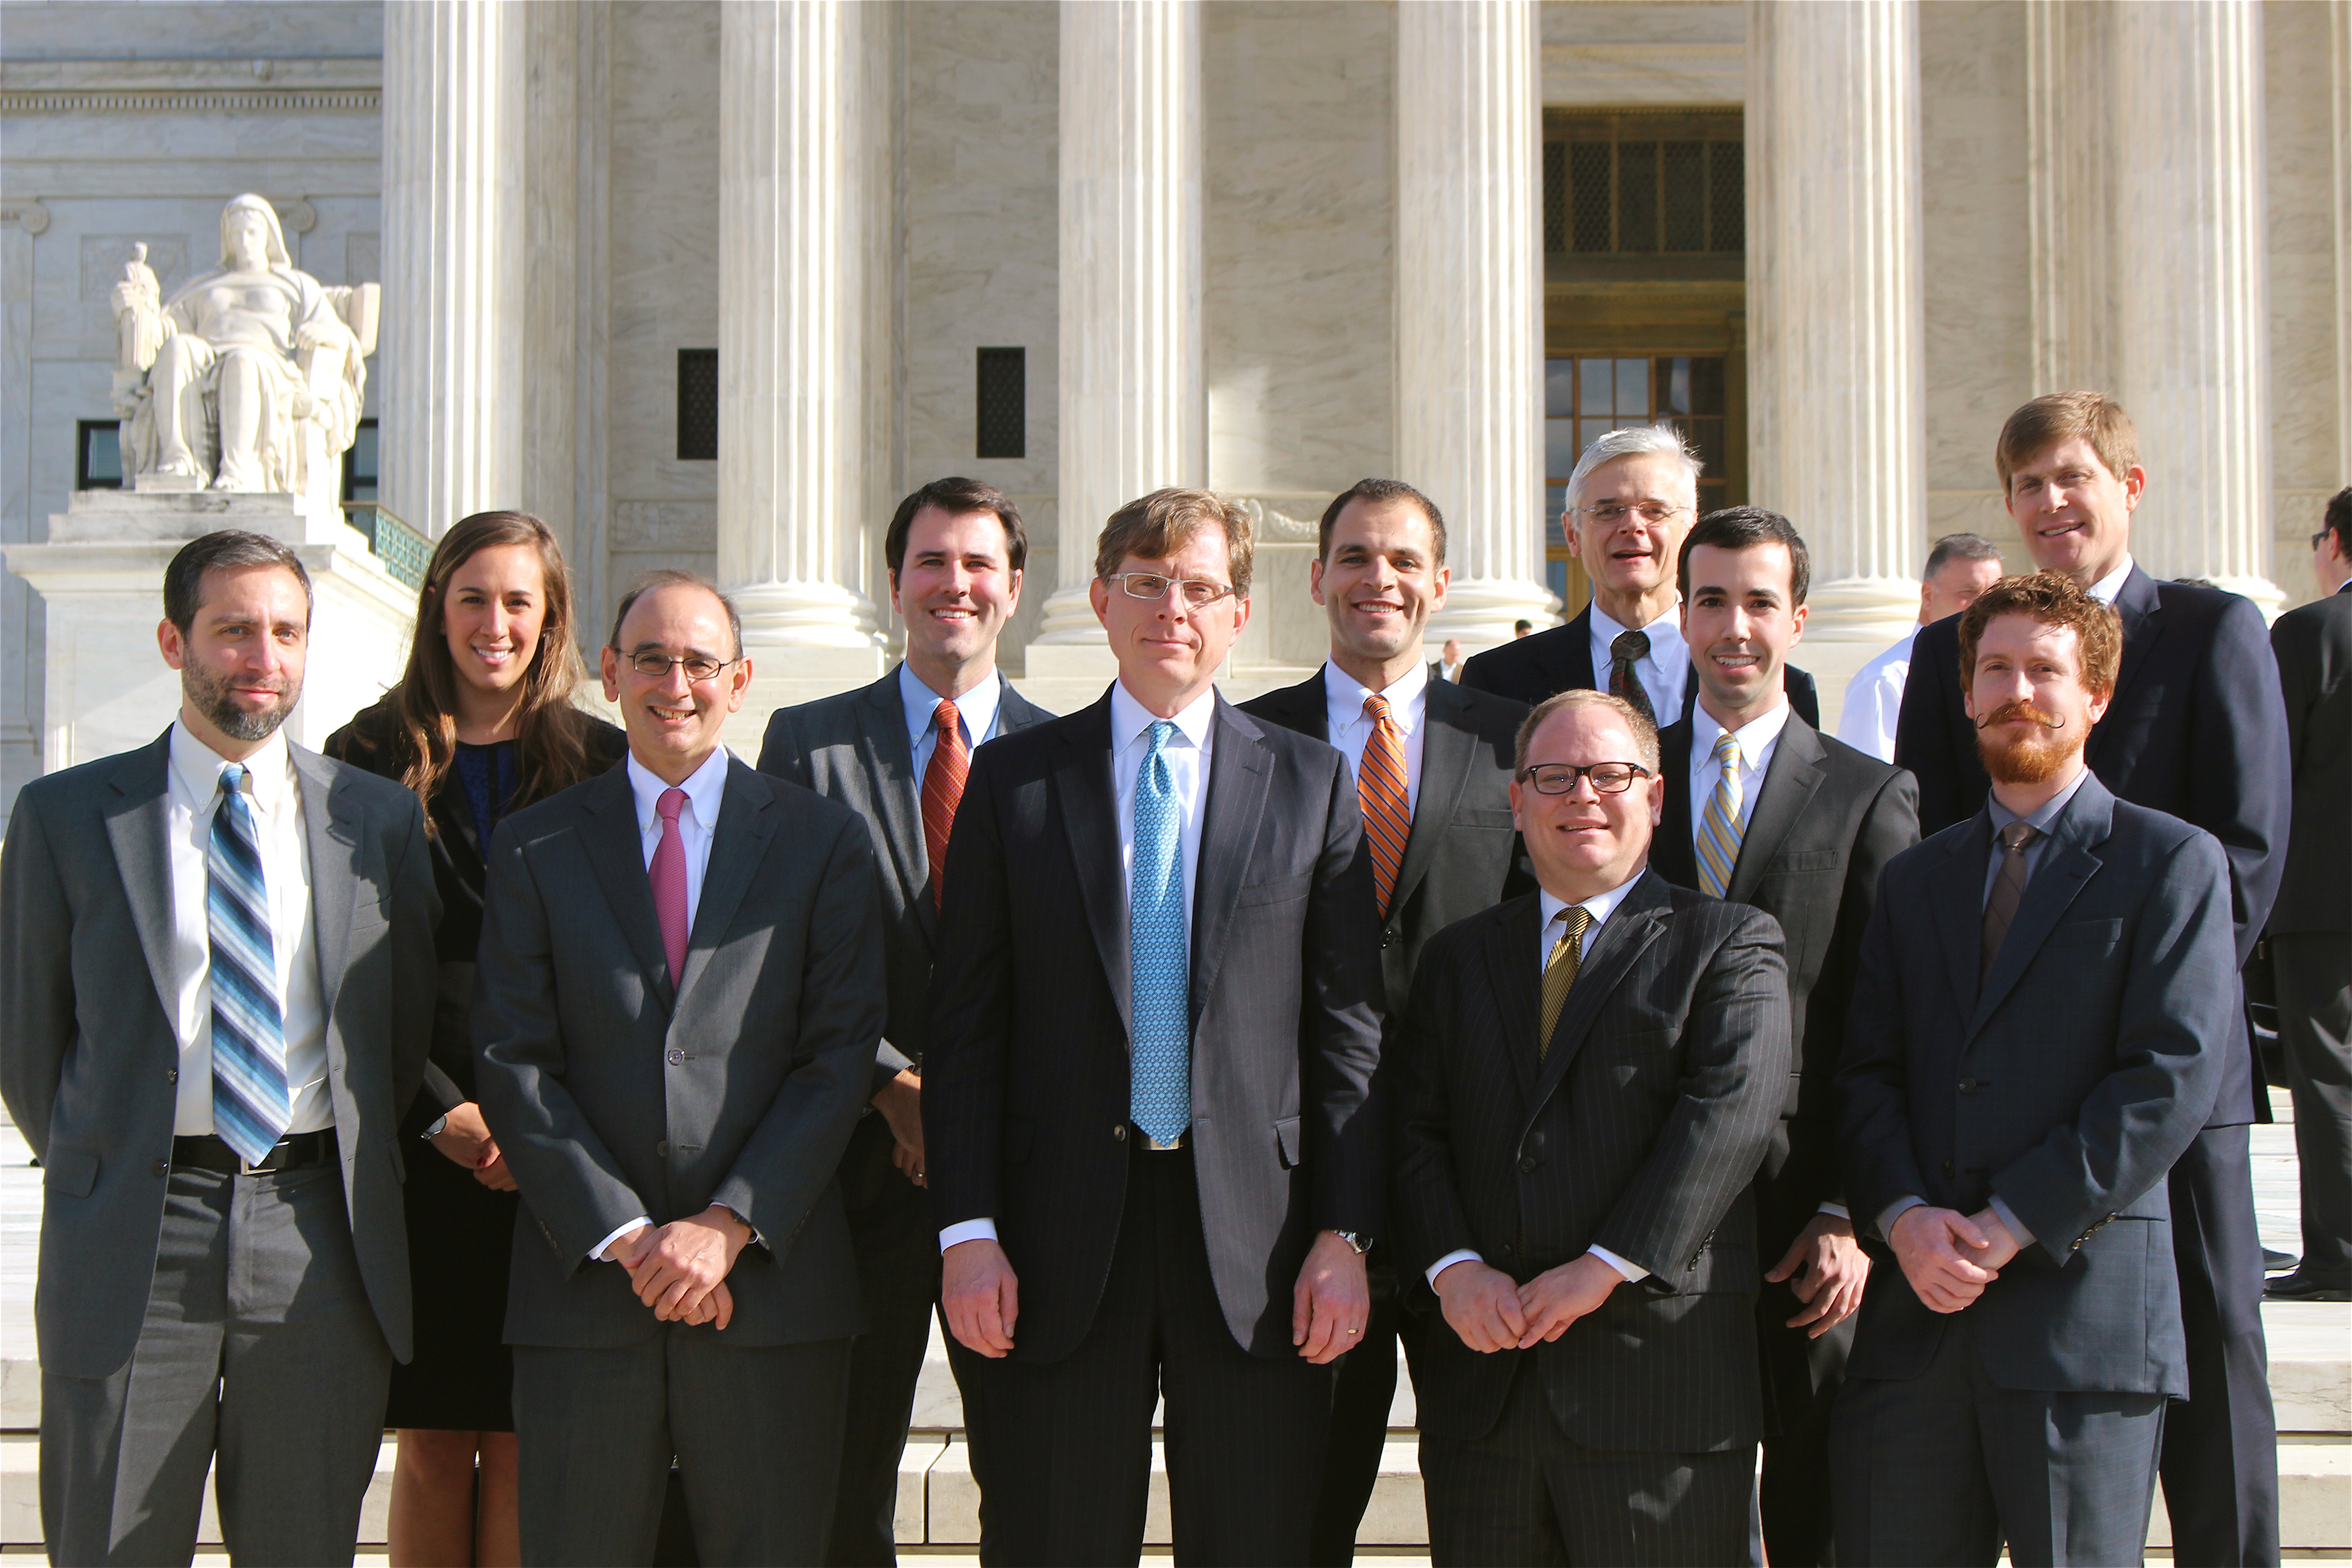 John Elwood (center, in blue tie) stands with a group of lawyers in front of the United States Supreme Court building